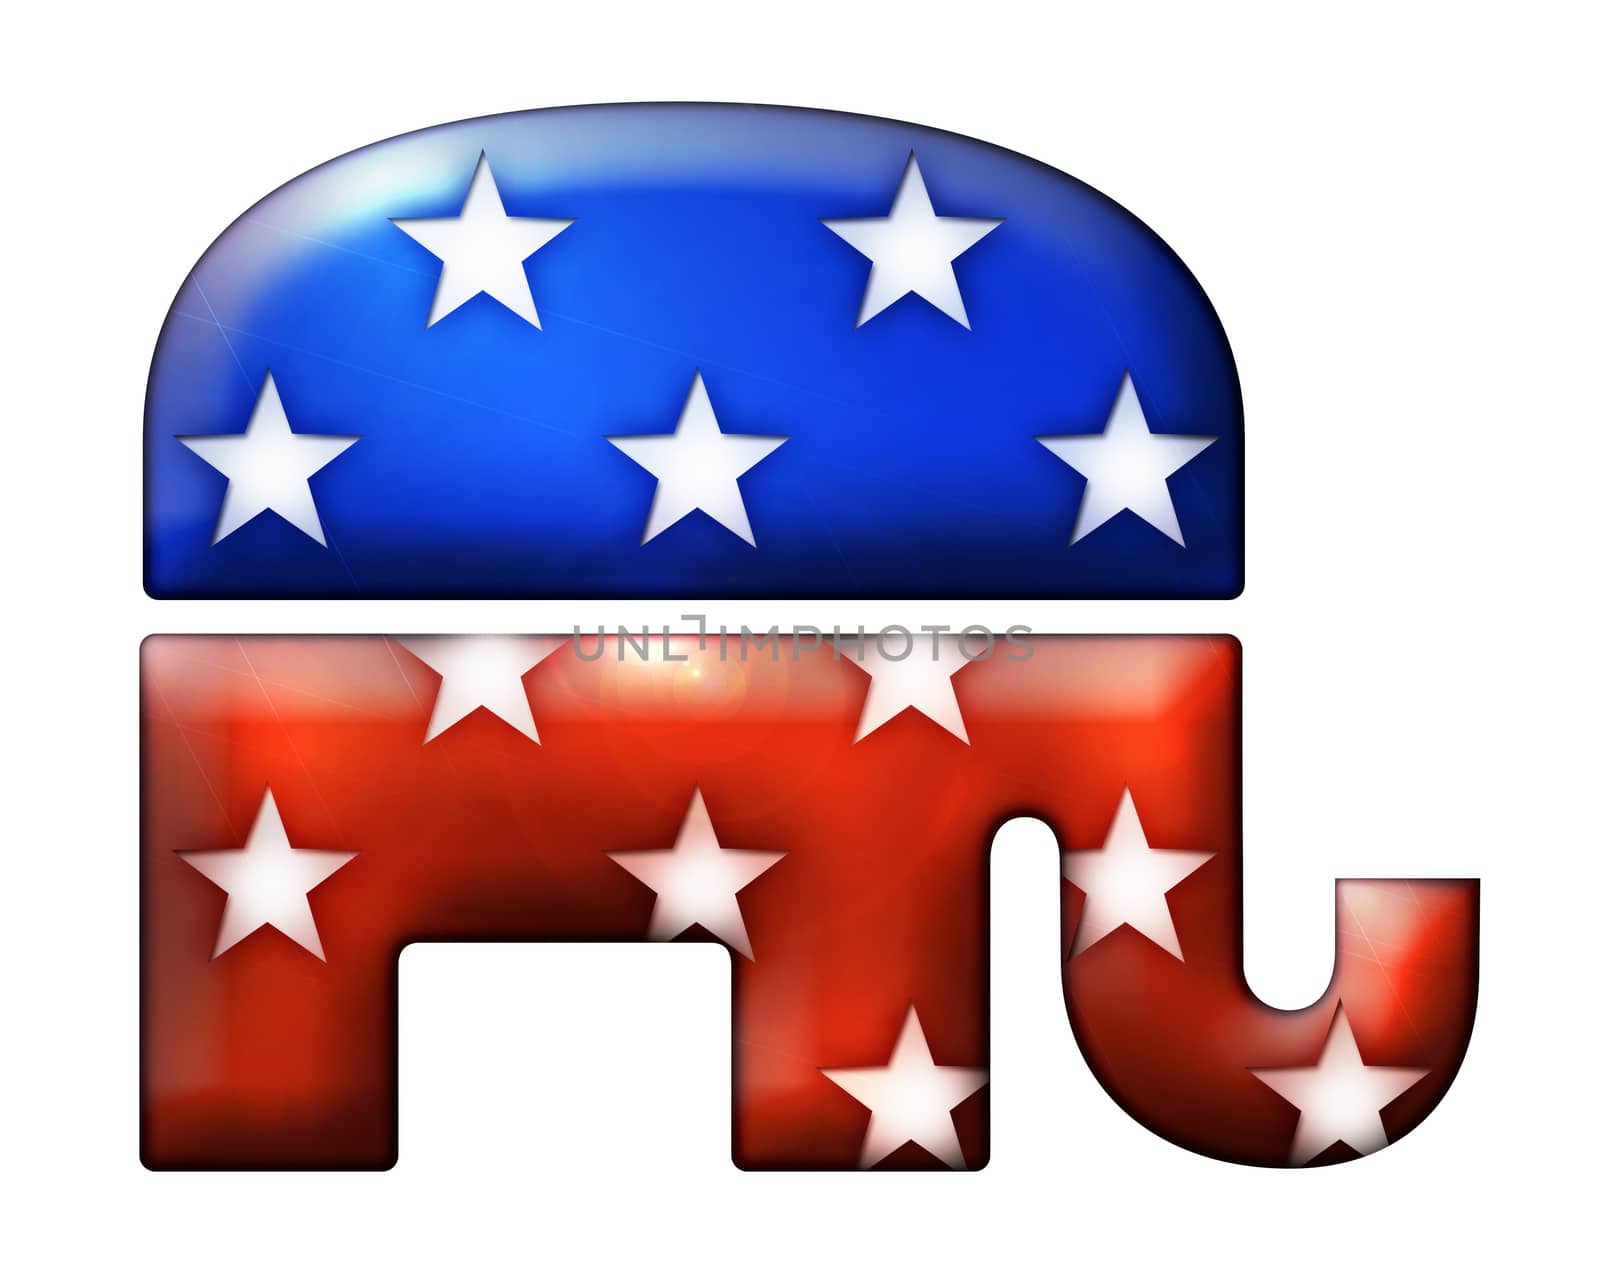 3D Republican elephant symbol with numerous star shapes cut into it. Includes a clipping path.